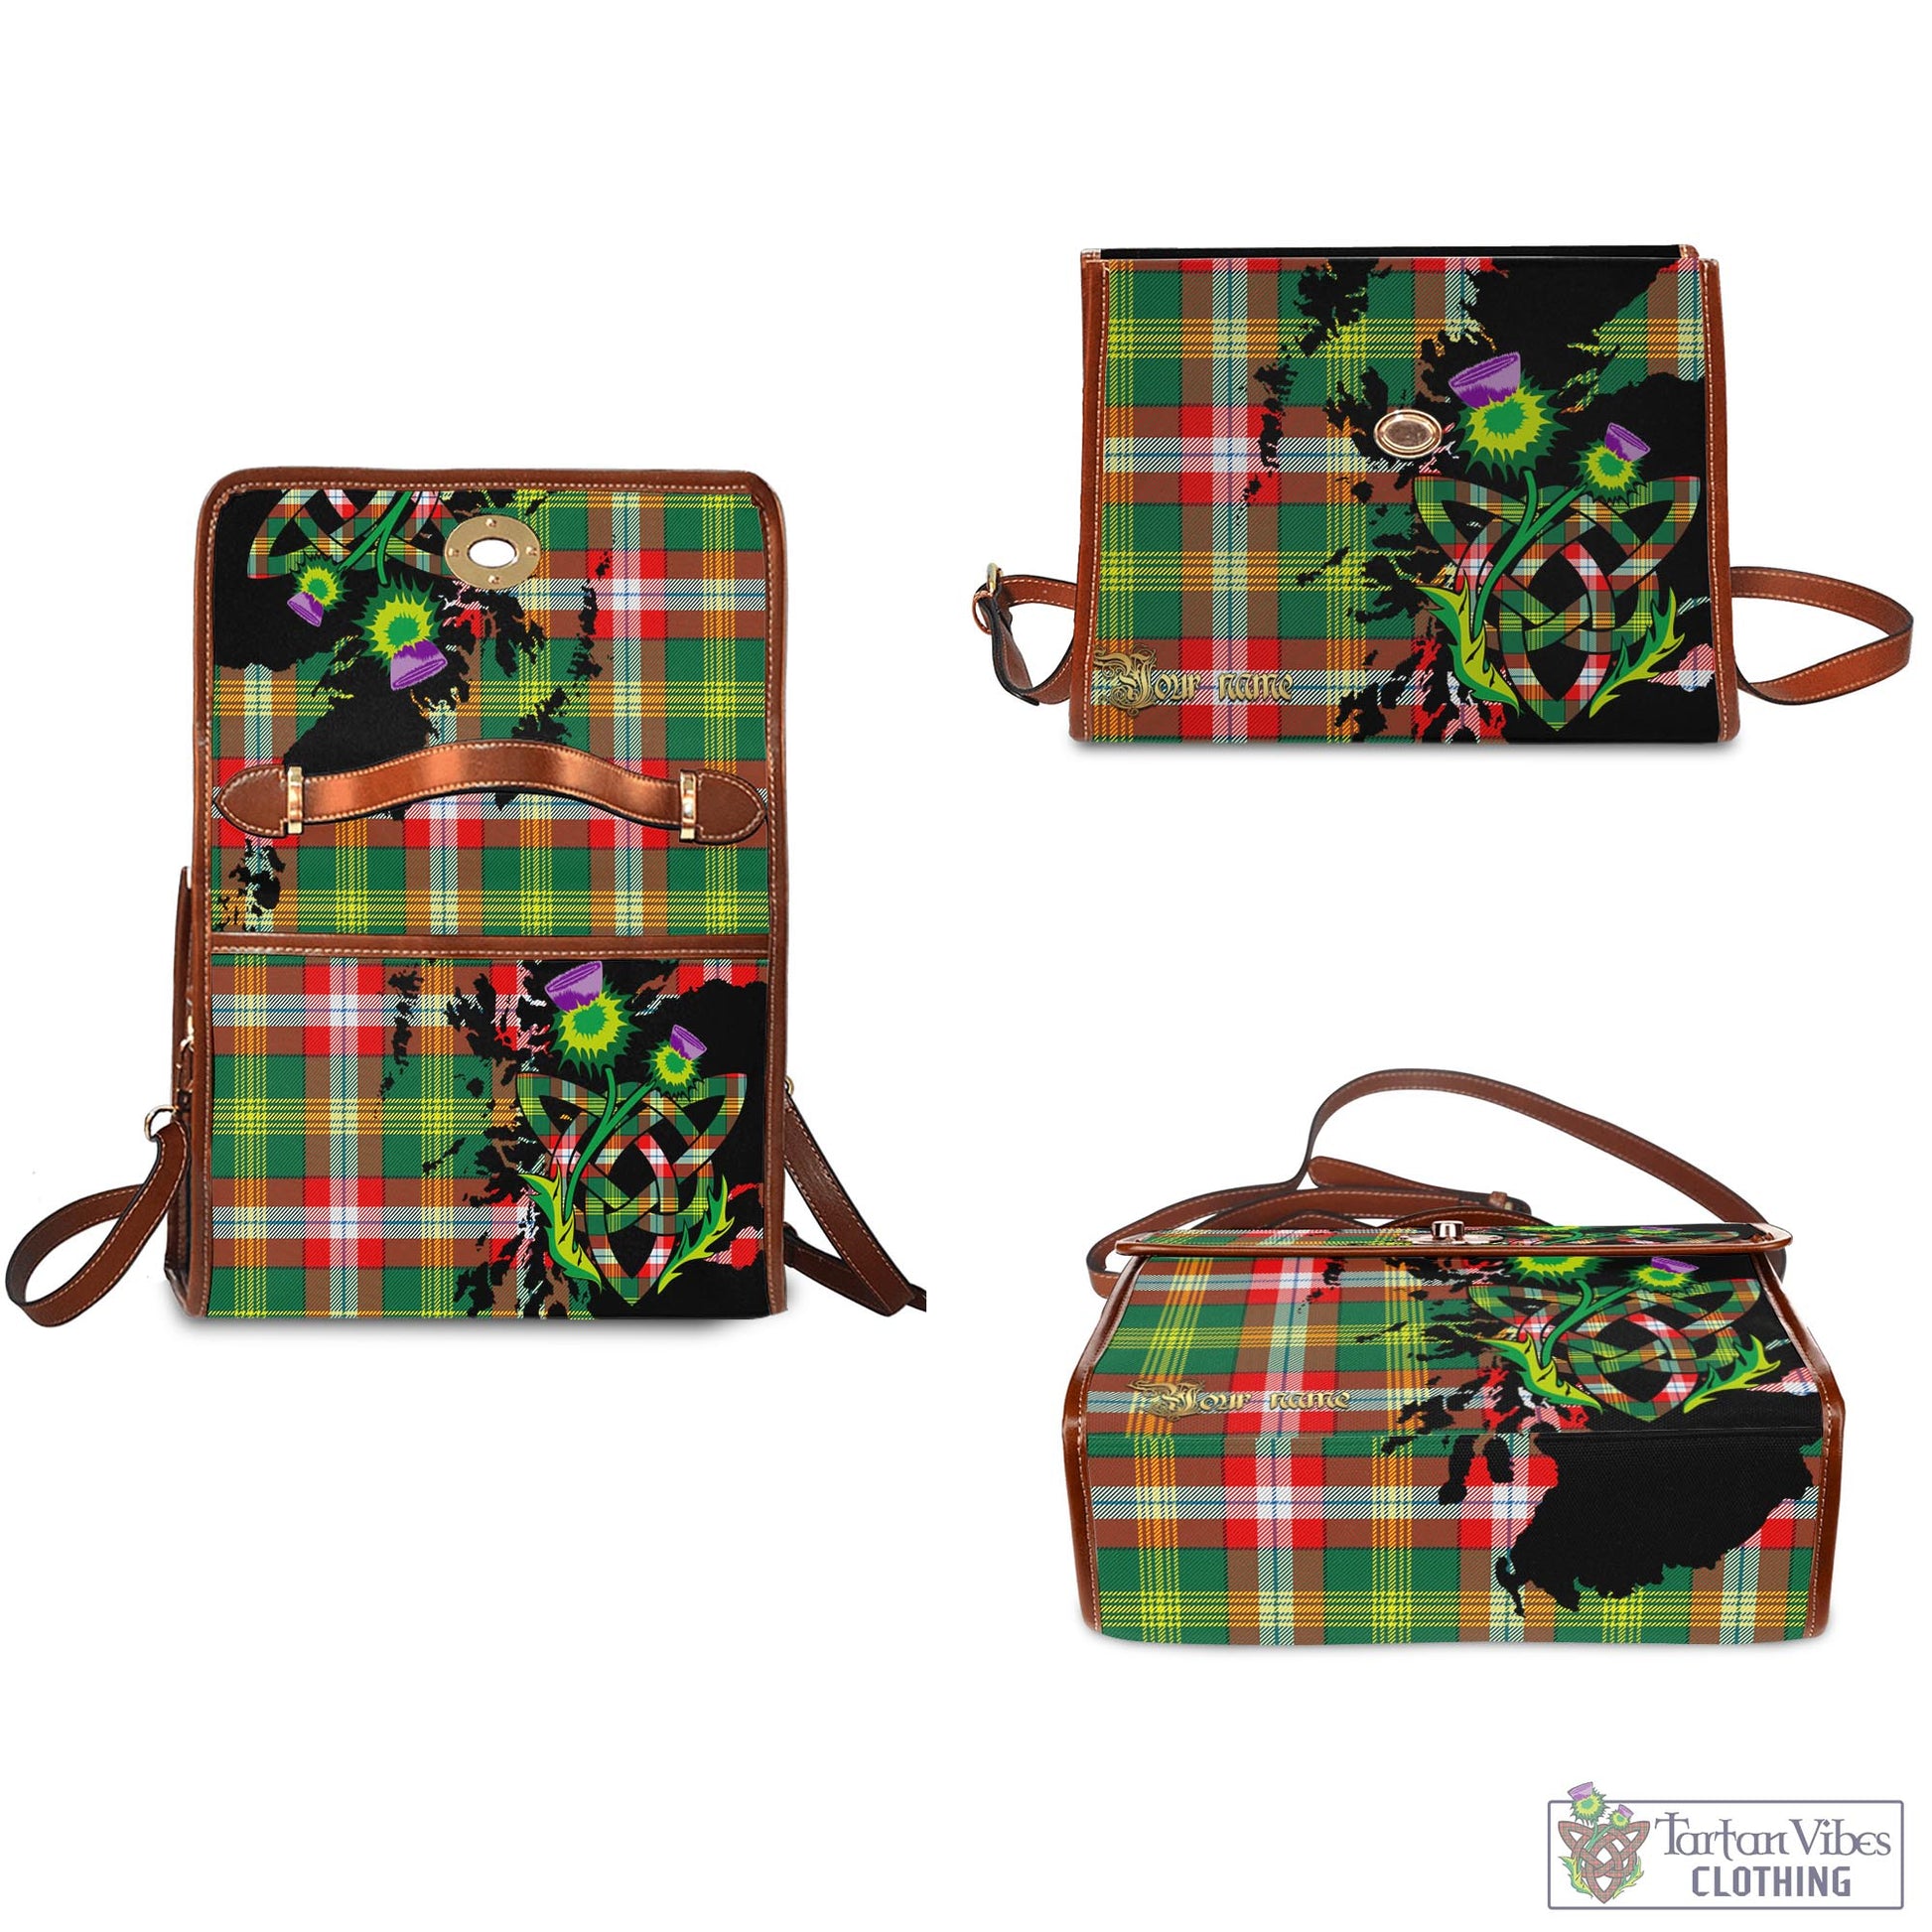 Tartan Vibes Clothing Northwest Territories Canada Tartan Waterproof Canvas Bag with Scotland Map and Thistle Celtic Accents